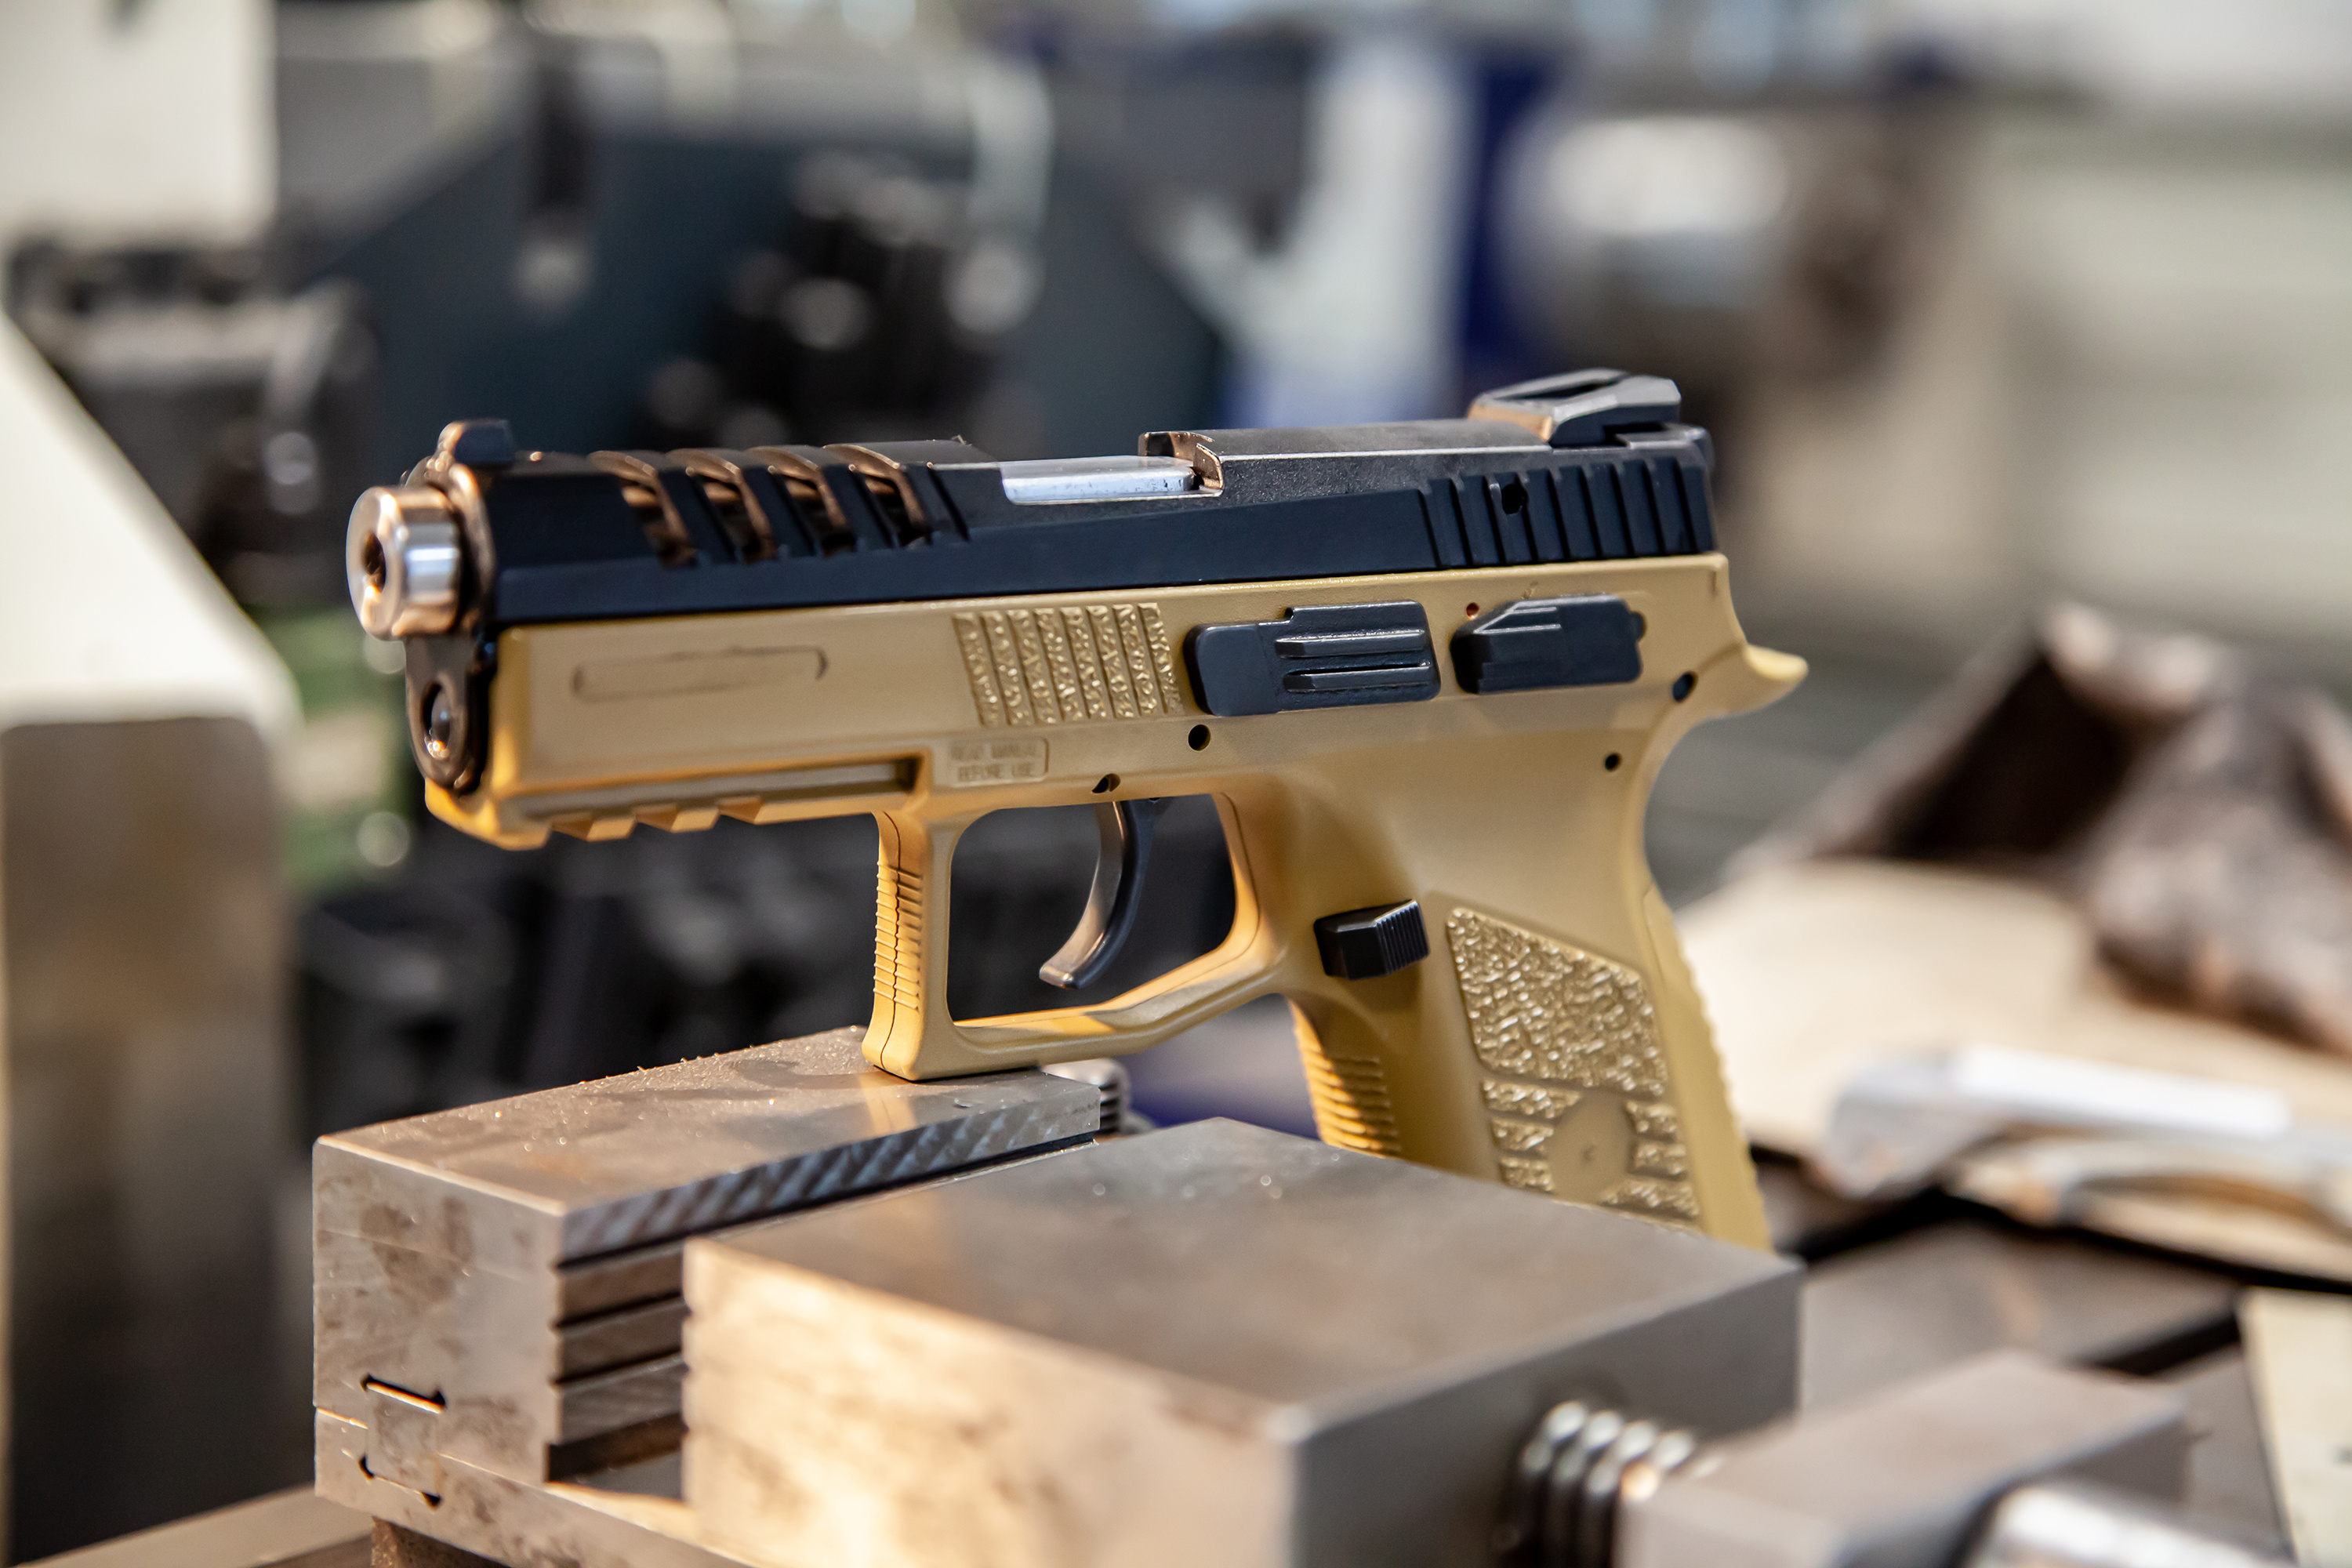 Phoenix Laser can now repair and manufacture firearms